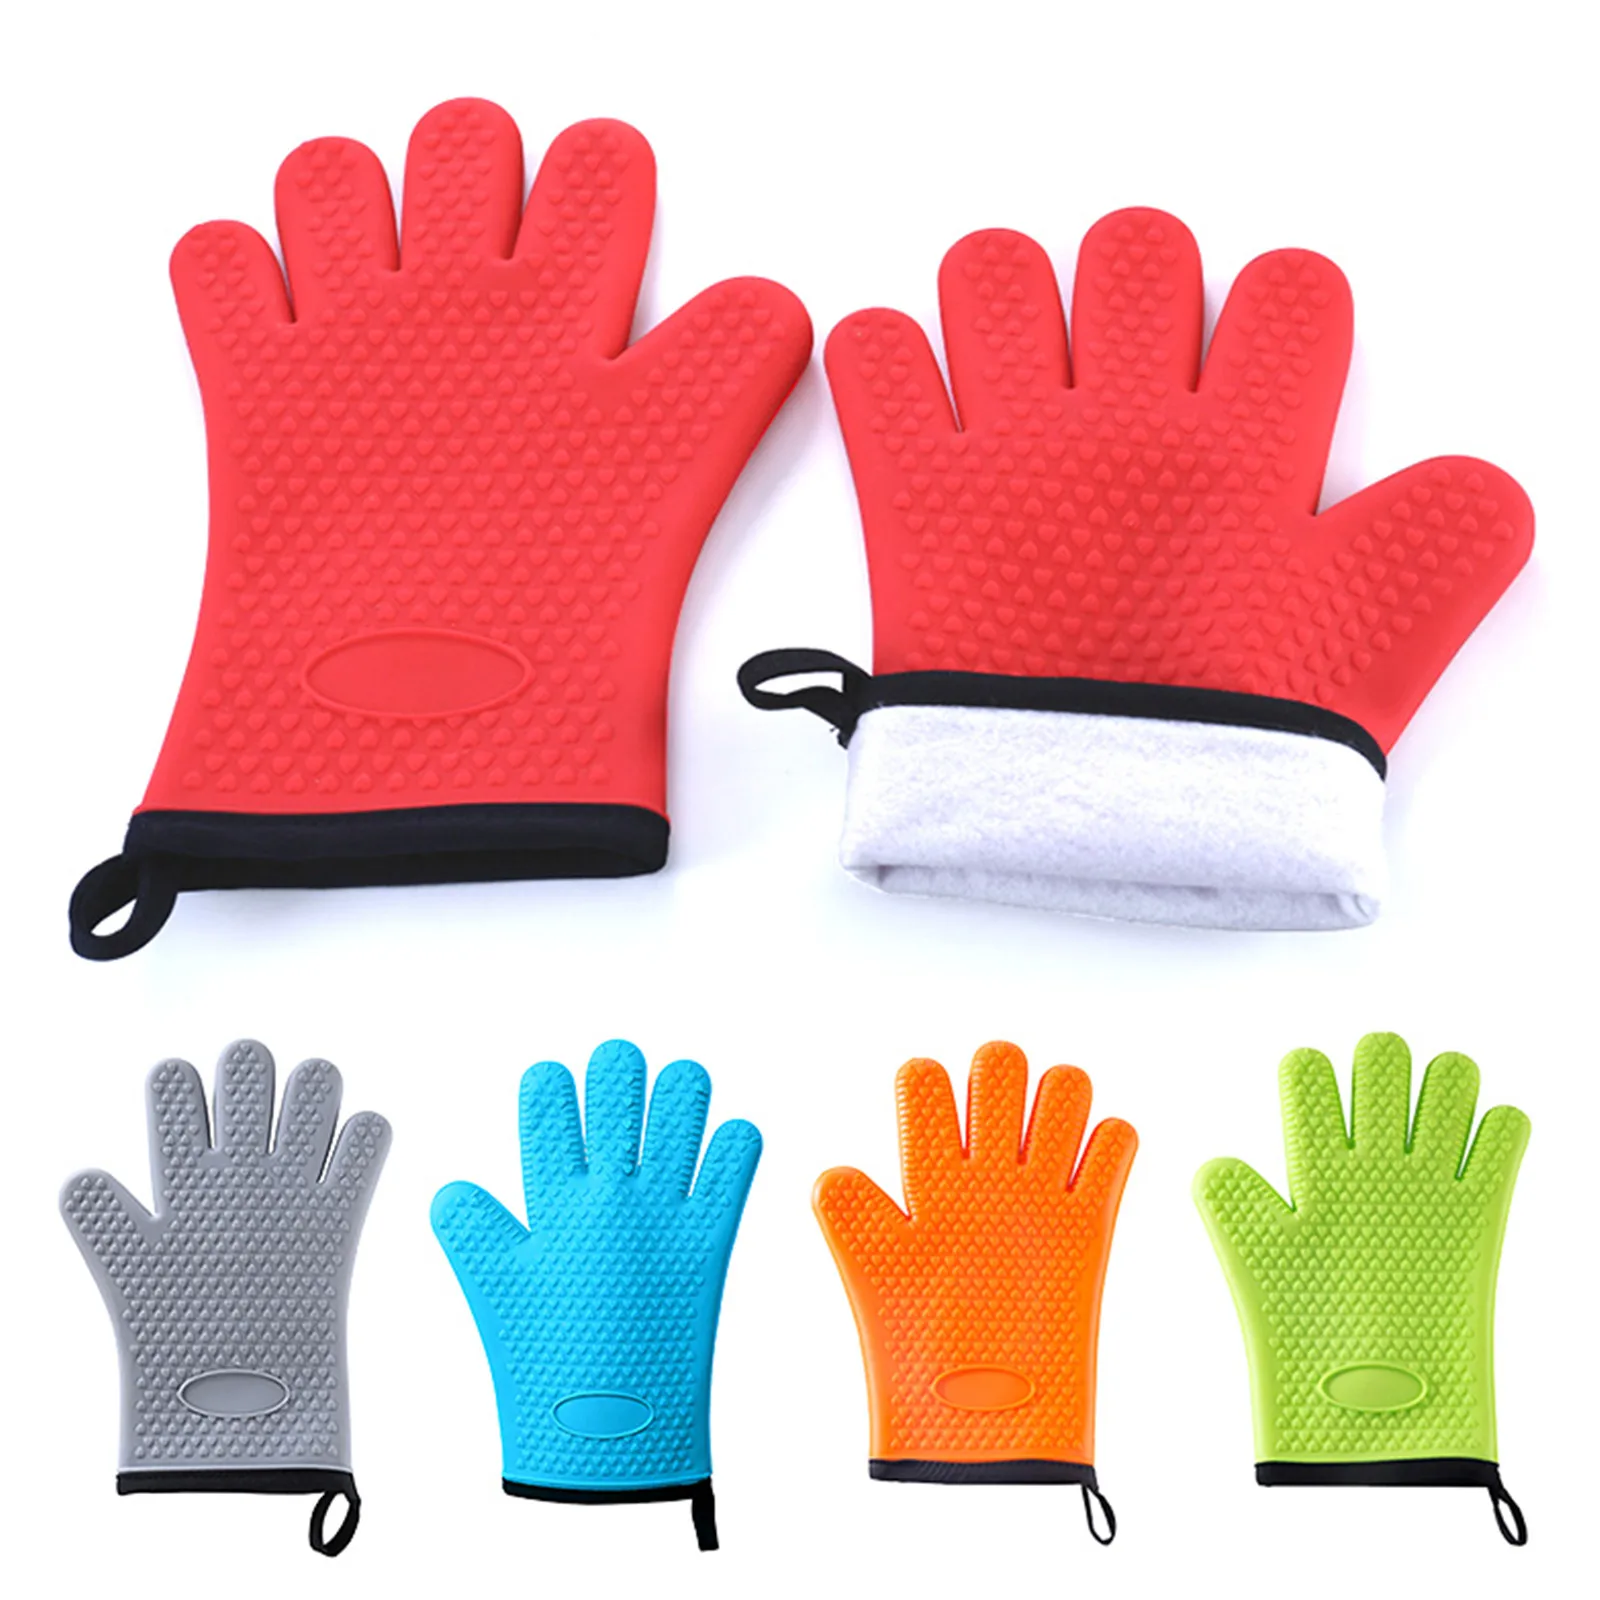 

Silicone Glove With Lanyard Kitchen Grilling Gloves Oven Mitt Heat Resistant Non-slip Cooking BBQ Grill Glove Baking Glove